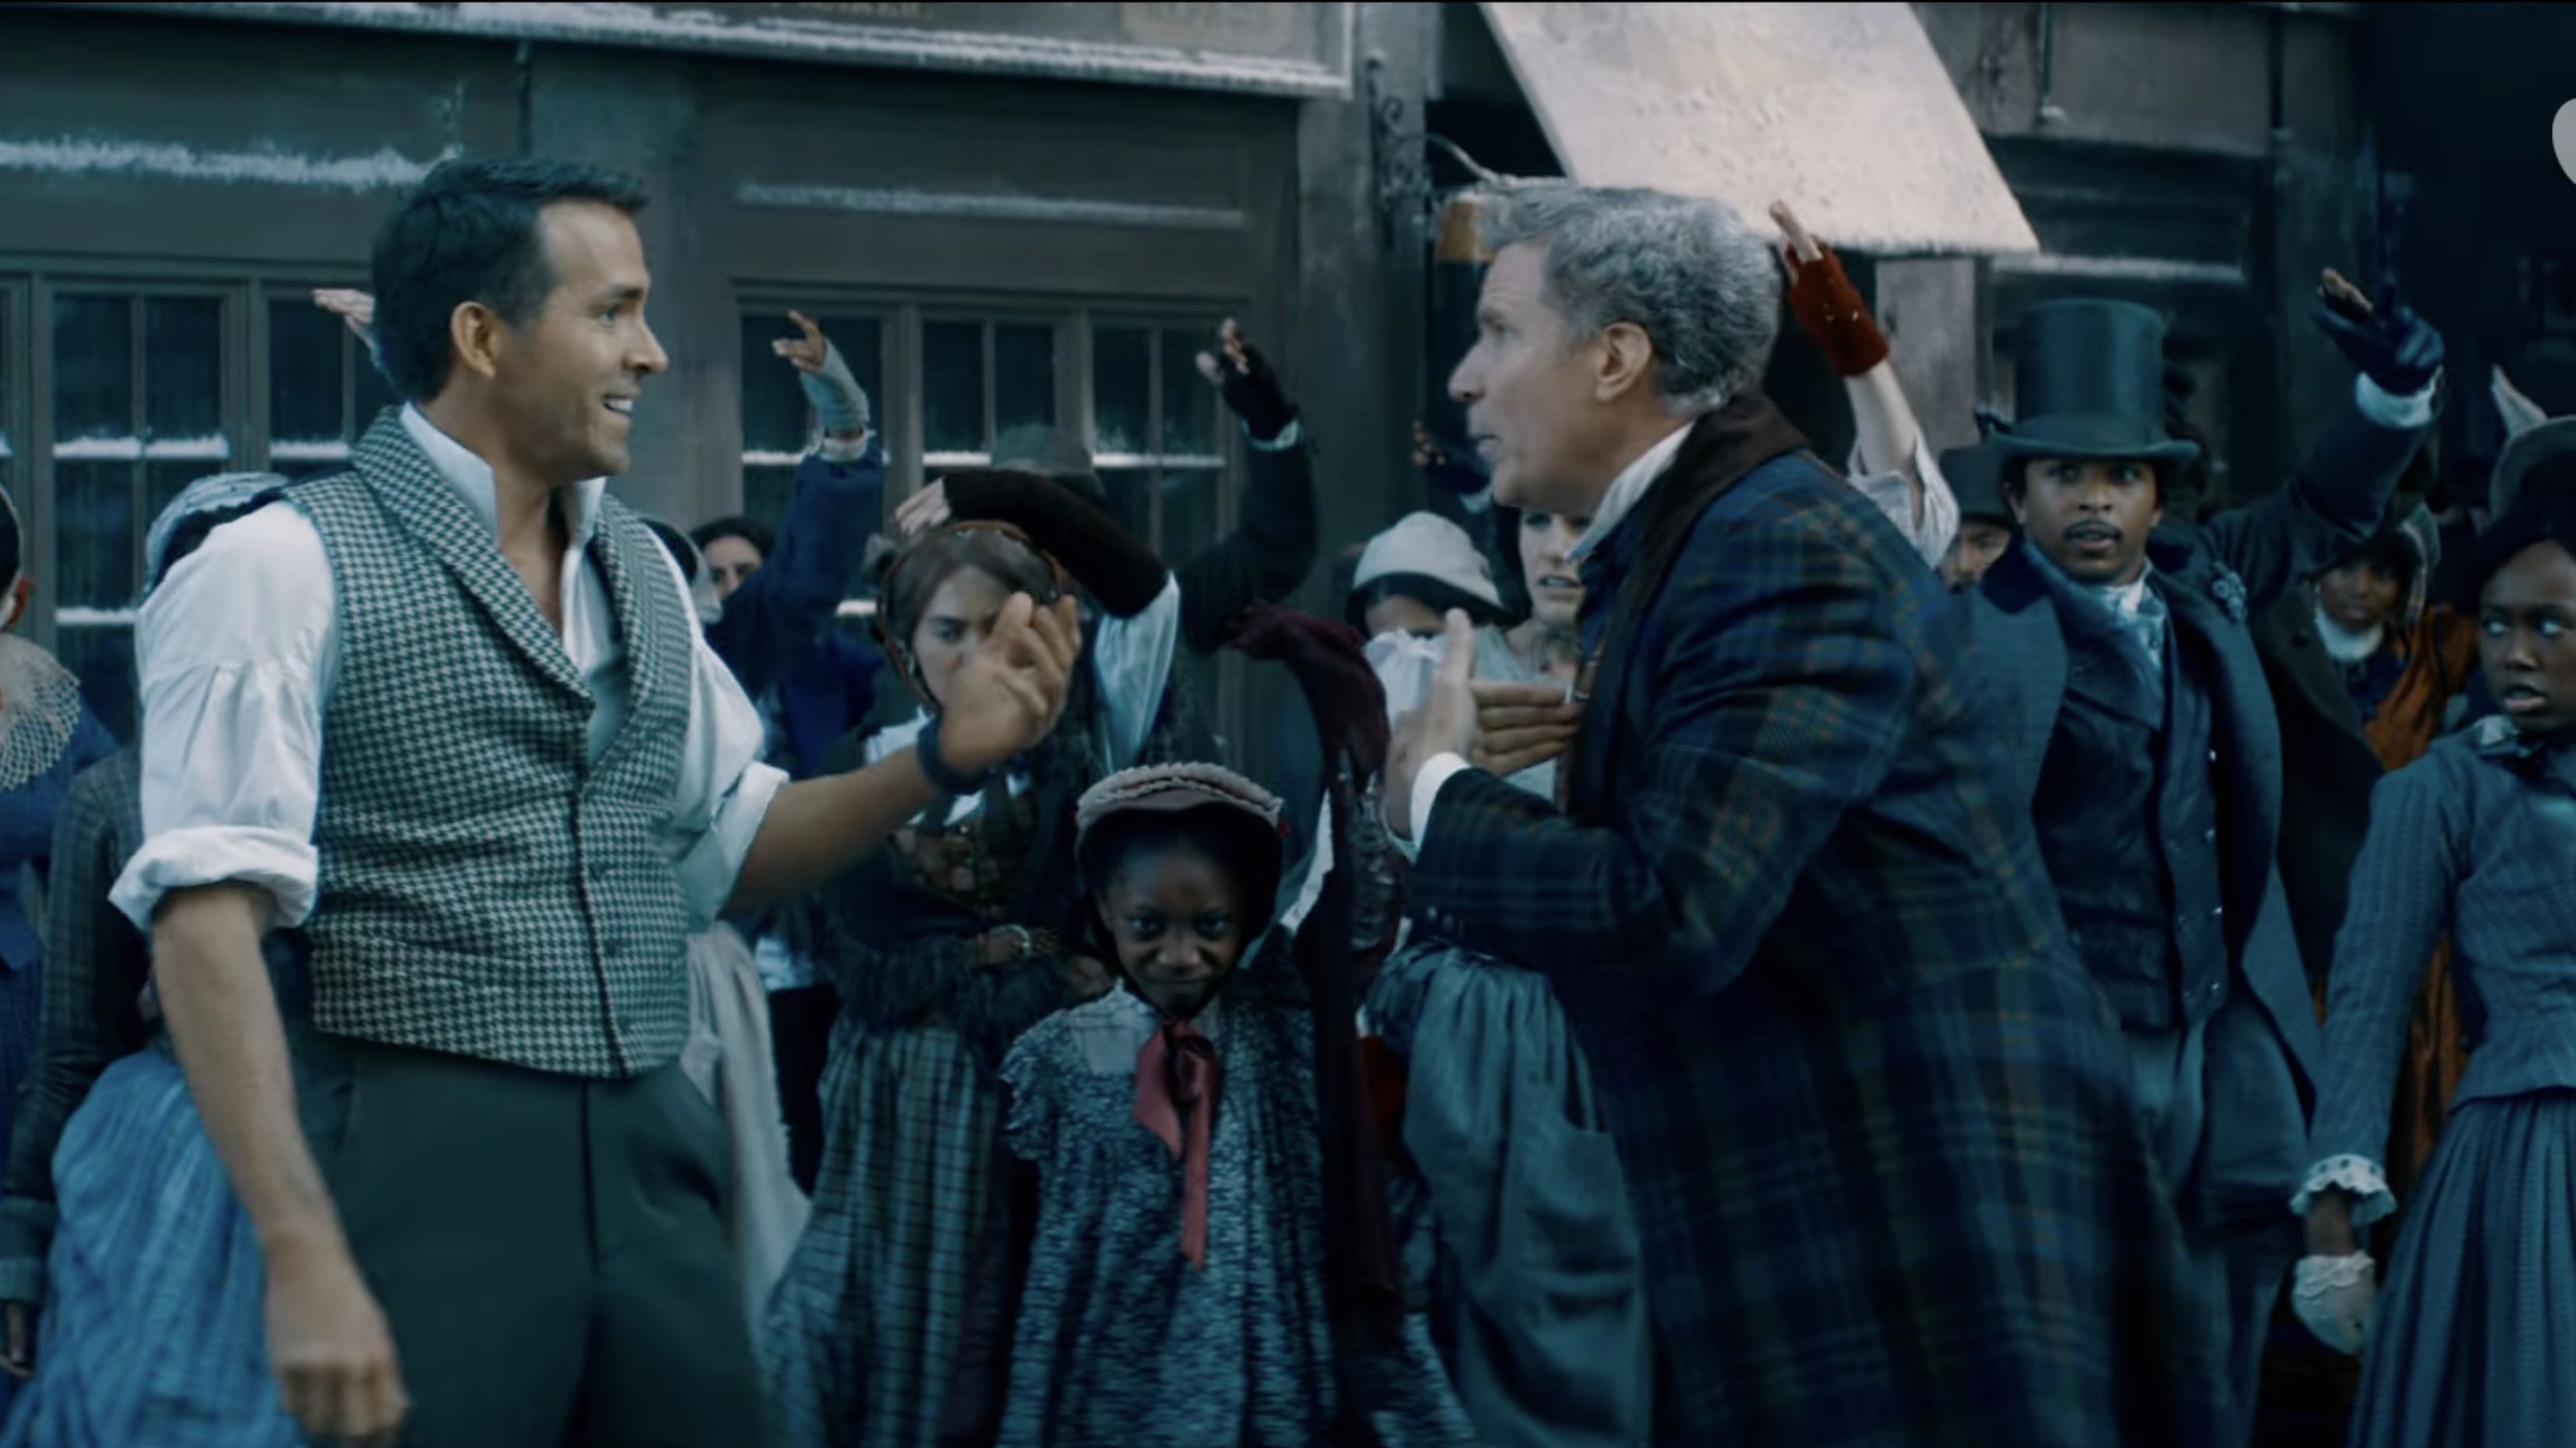 Will Ferrell & Ryan Reynolds: Video about new holiday movie - Vancouver Is  Awesome